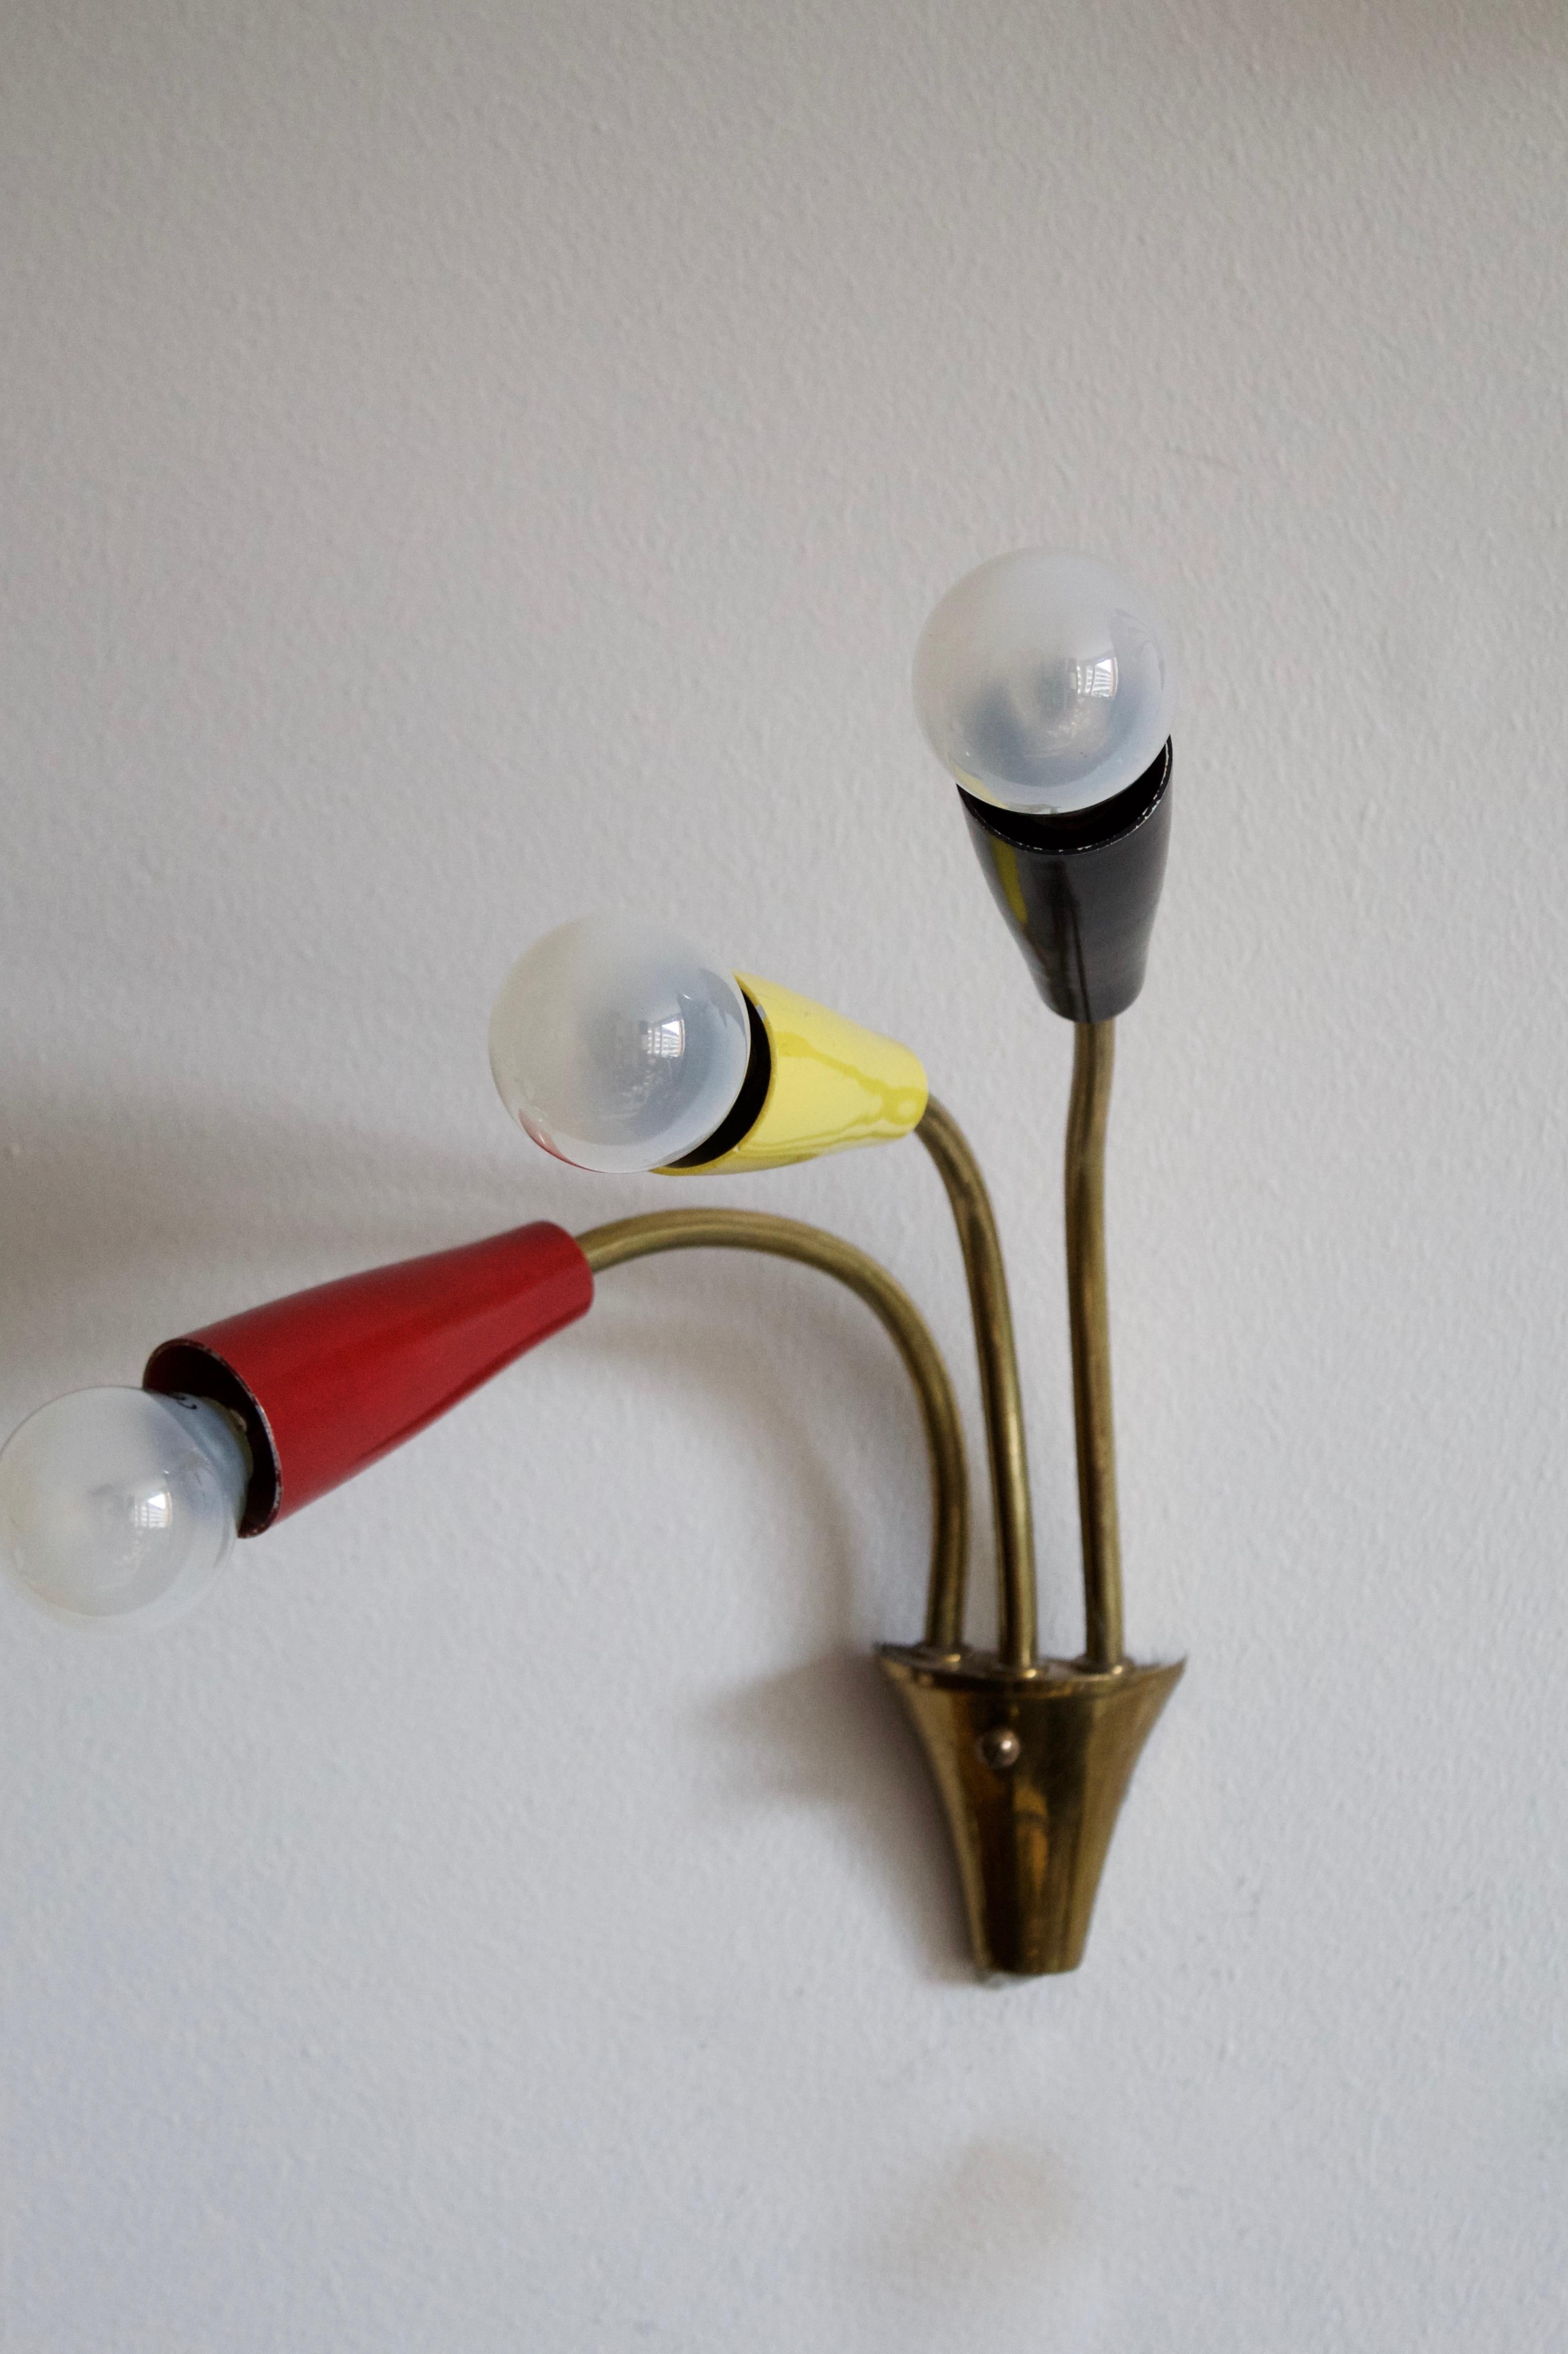 Italian, Three-Armed Wall Lights, Brass, Lacquered Metal, Italy, 1950s For Sale 1